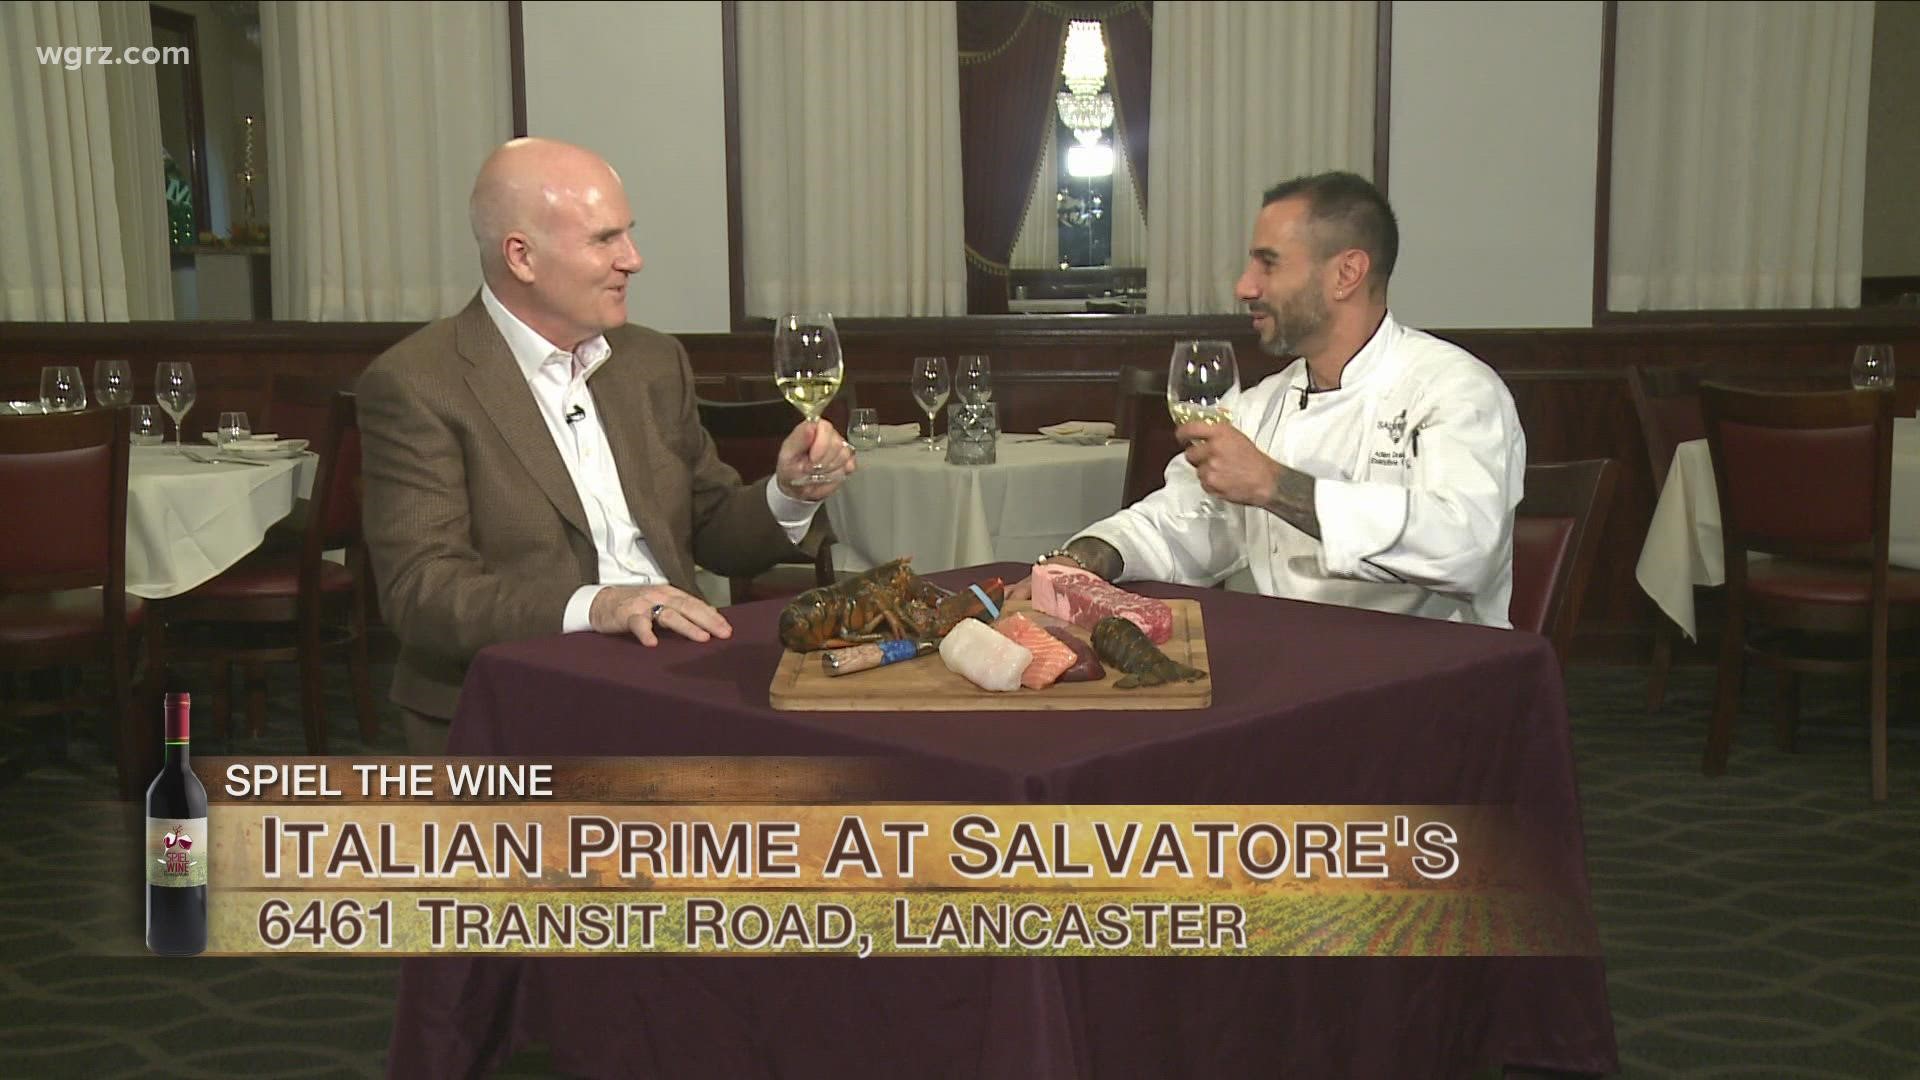 Spiel The Wine - October 16 - Segment 1 (THIS VIDEO IS SPONSORED BY ITALIAN PRIME AT SALVATORES)